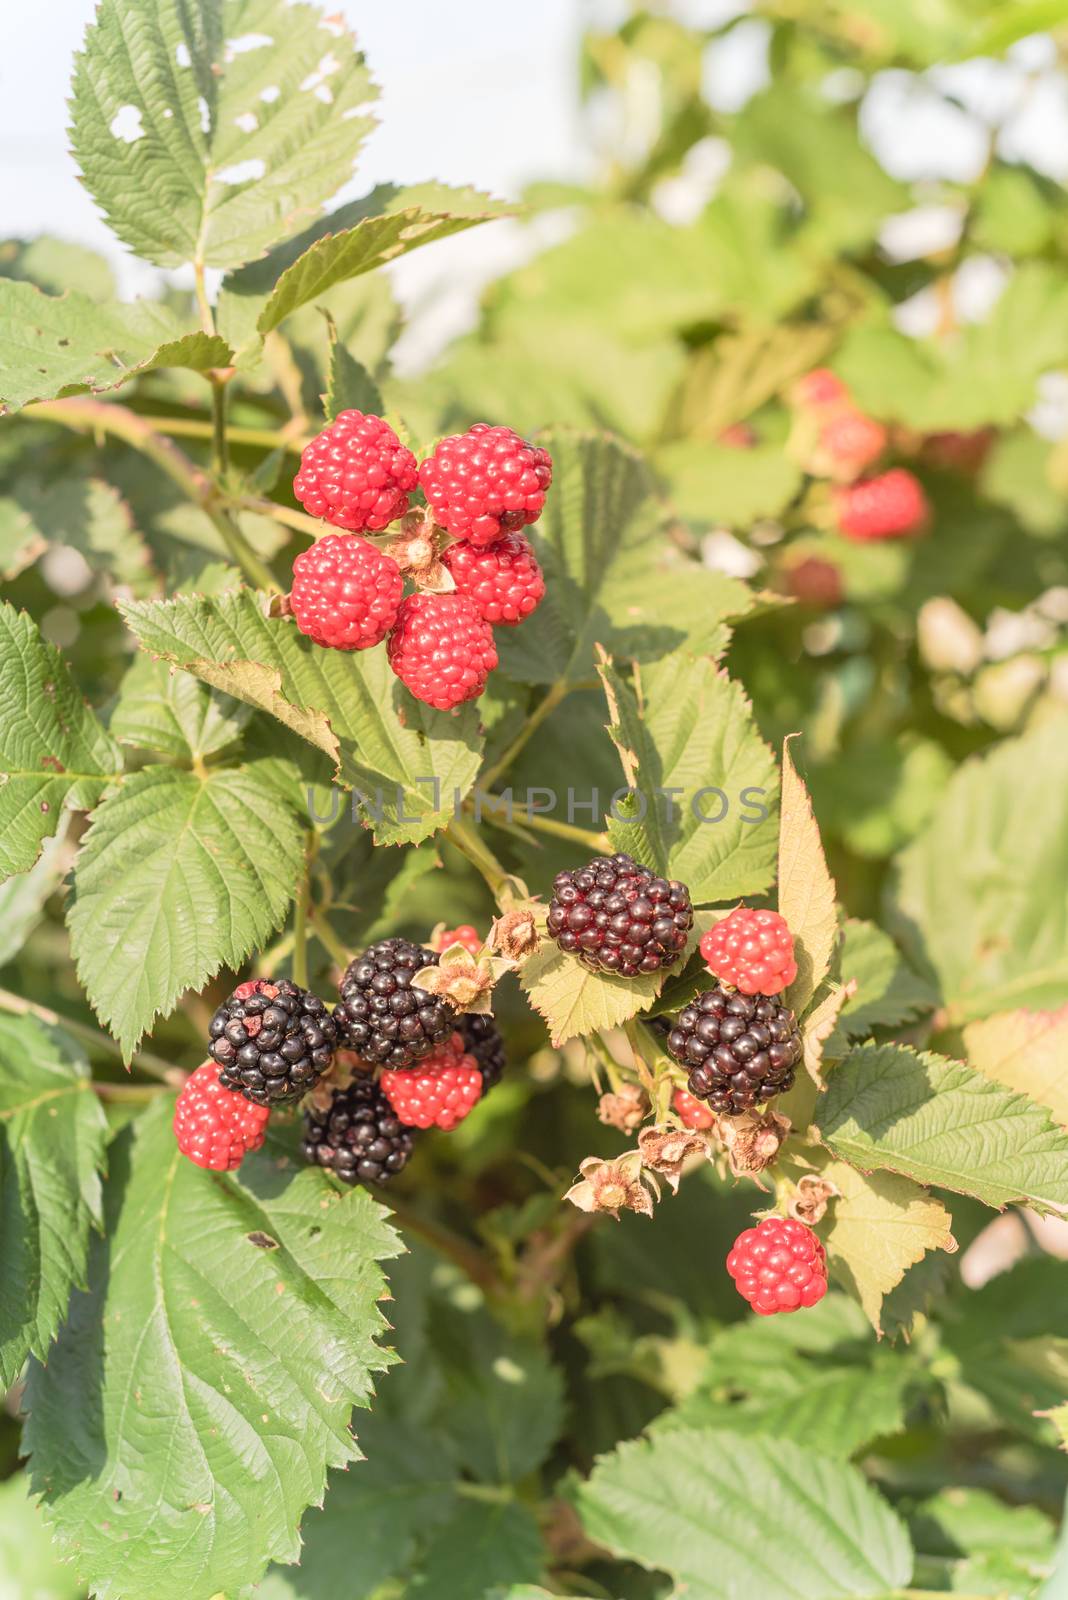 Pile of ripe and unripe blackberries growing on tree. Red (unripe) and dark black (ripe) raw organic blueberry with green leaves background